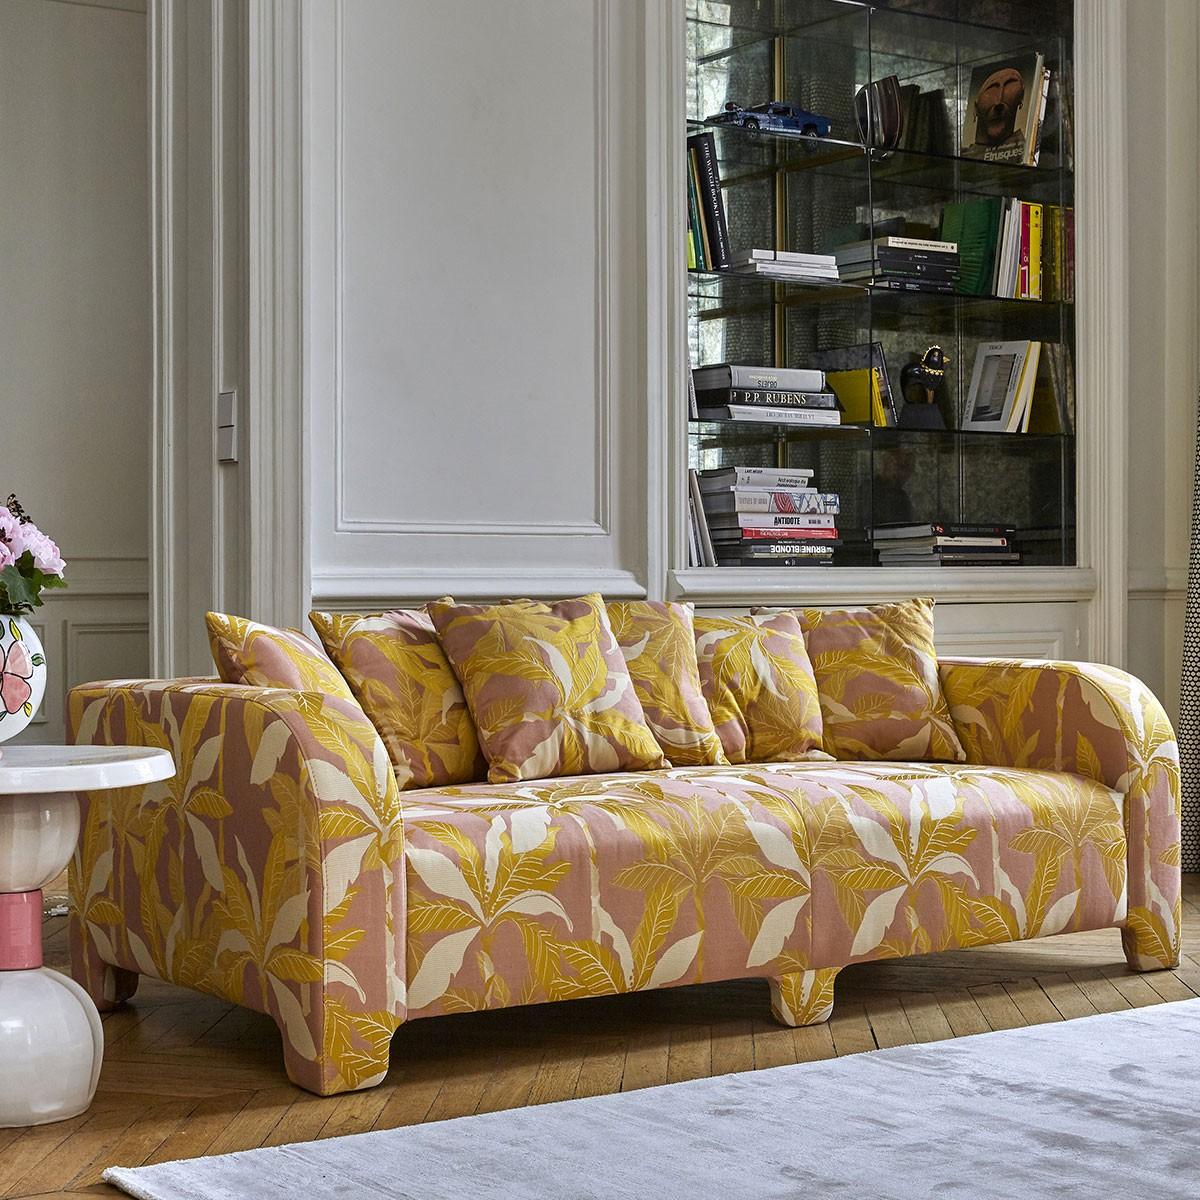 Popus Editions Graziella 3-seater sofa in pink Megeve Fabric Knit Effect

A foot that hides another. A cushion that hides another. A curve that hides another with contemporary lines and a base like a punctuation mark, this sofa gives pride of